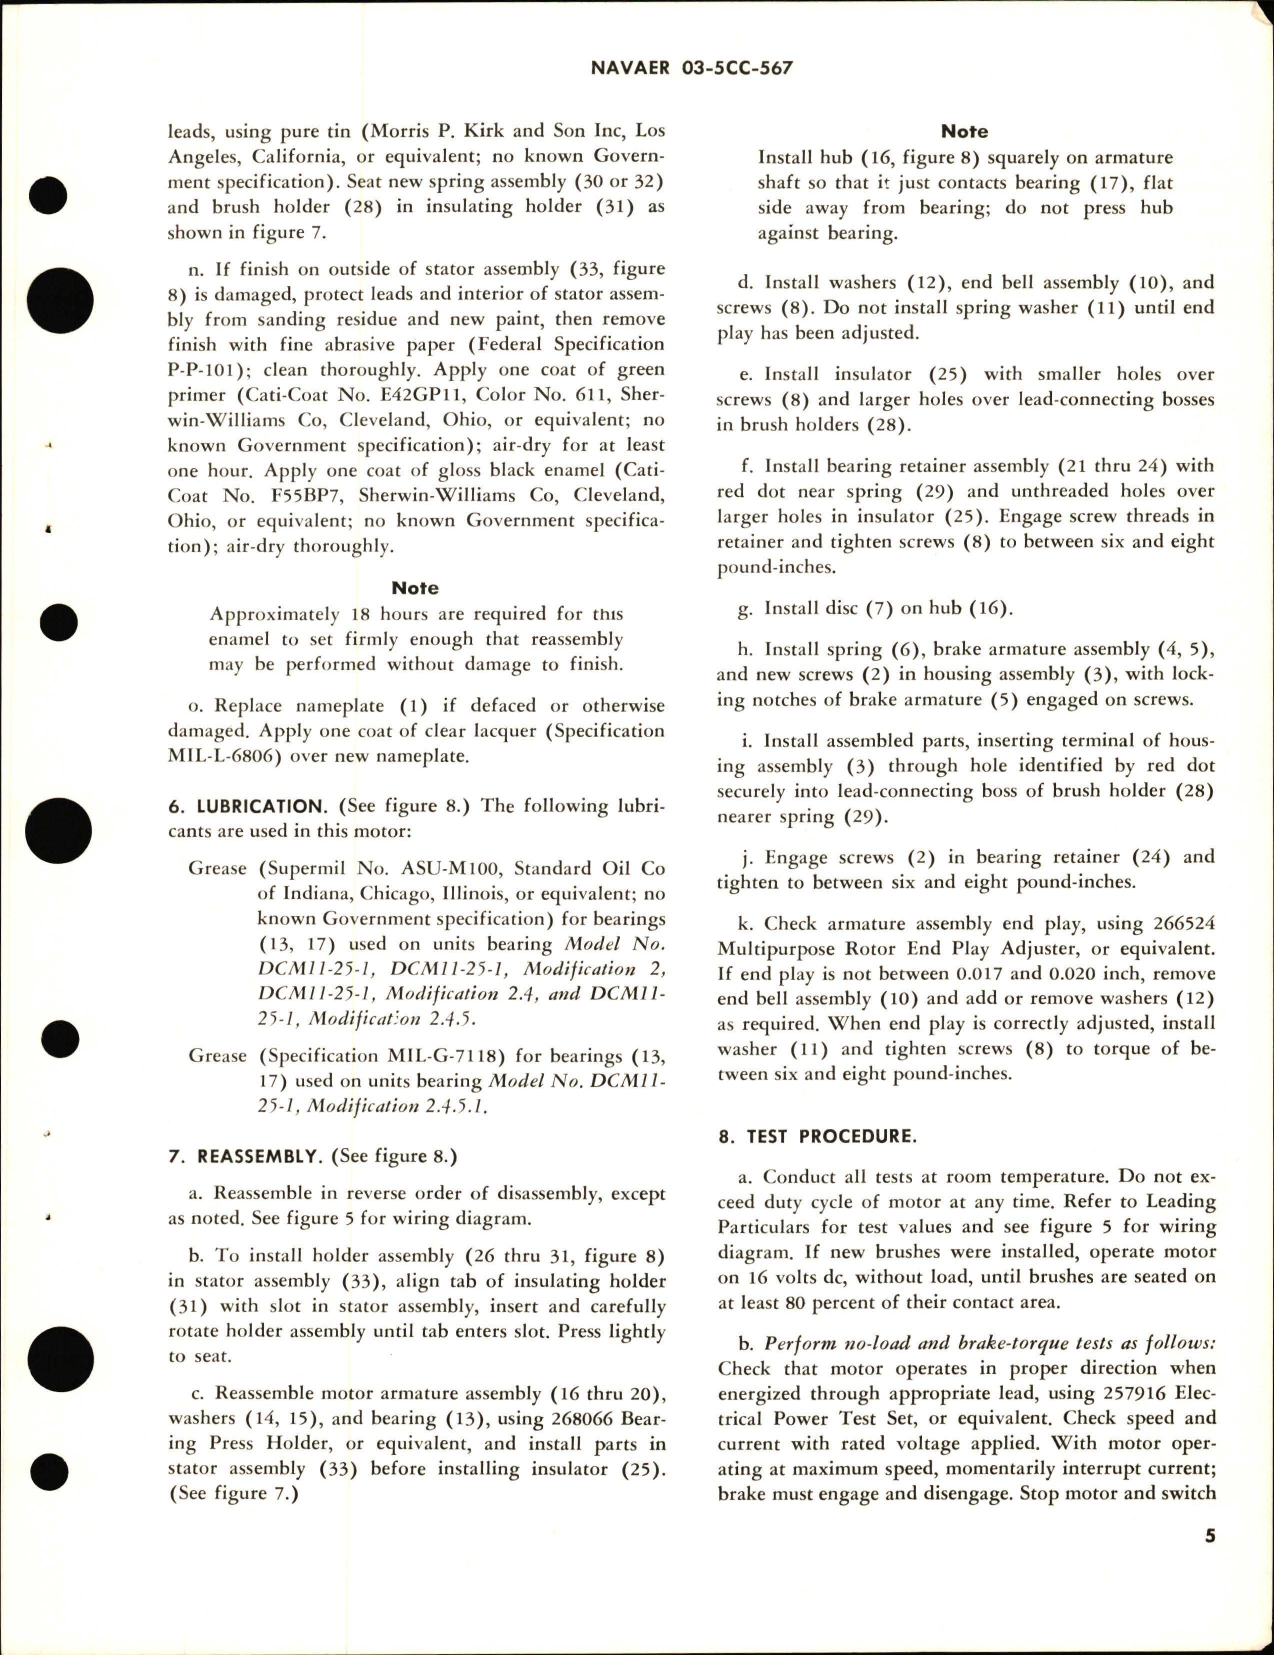 Sample page 5 from AirCorps Library document: Overhaul Instructions with Parts Breakdown for Motor, Aircraft Direct Current - Part 36873 